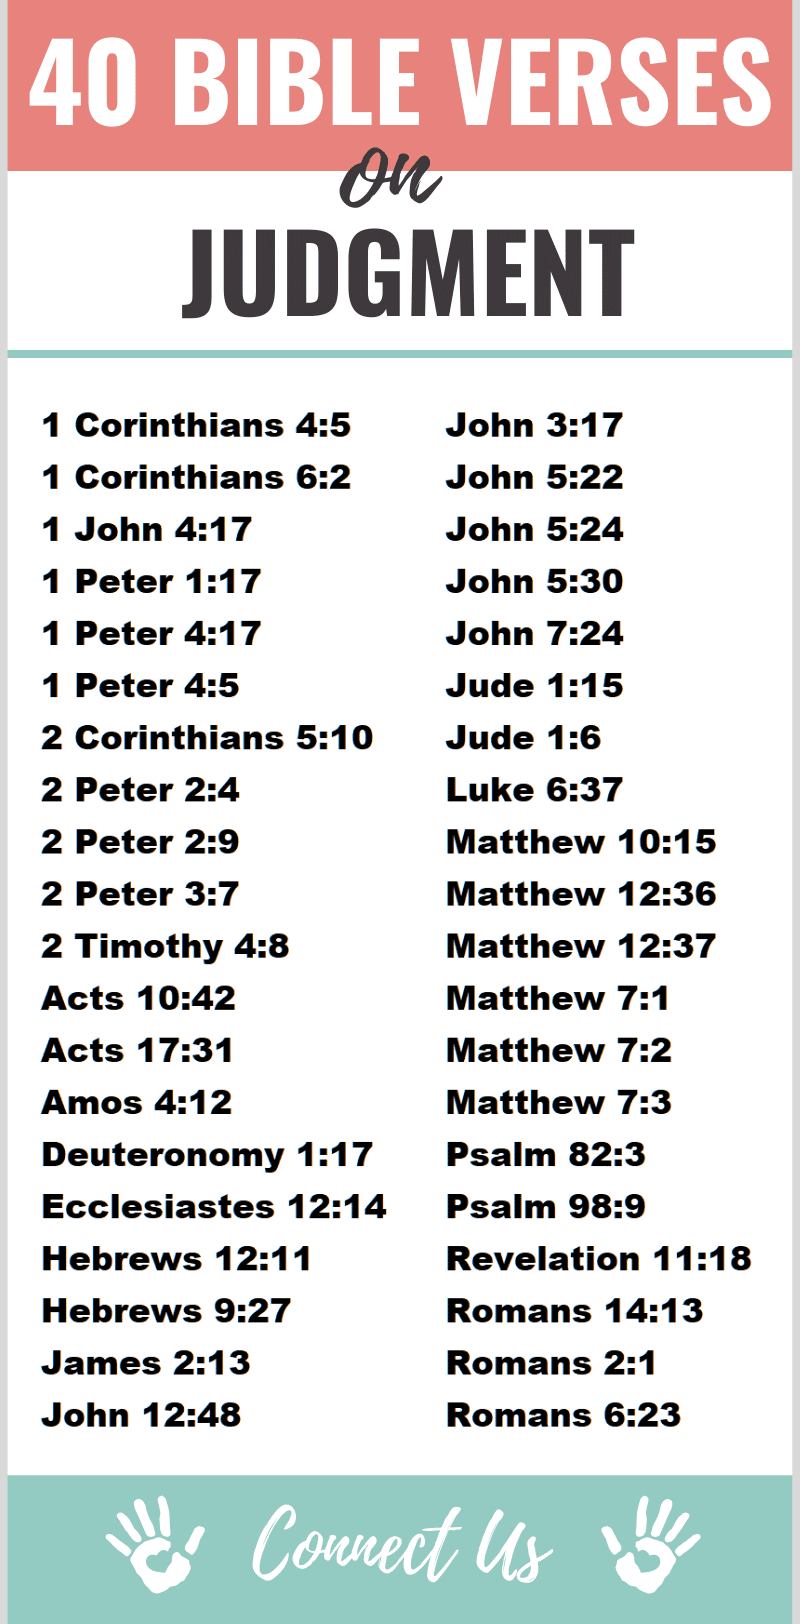 Bible Verses on Judgment